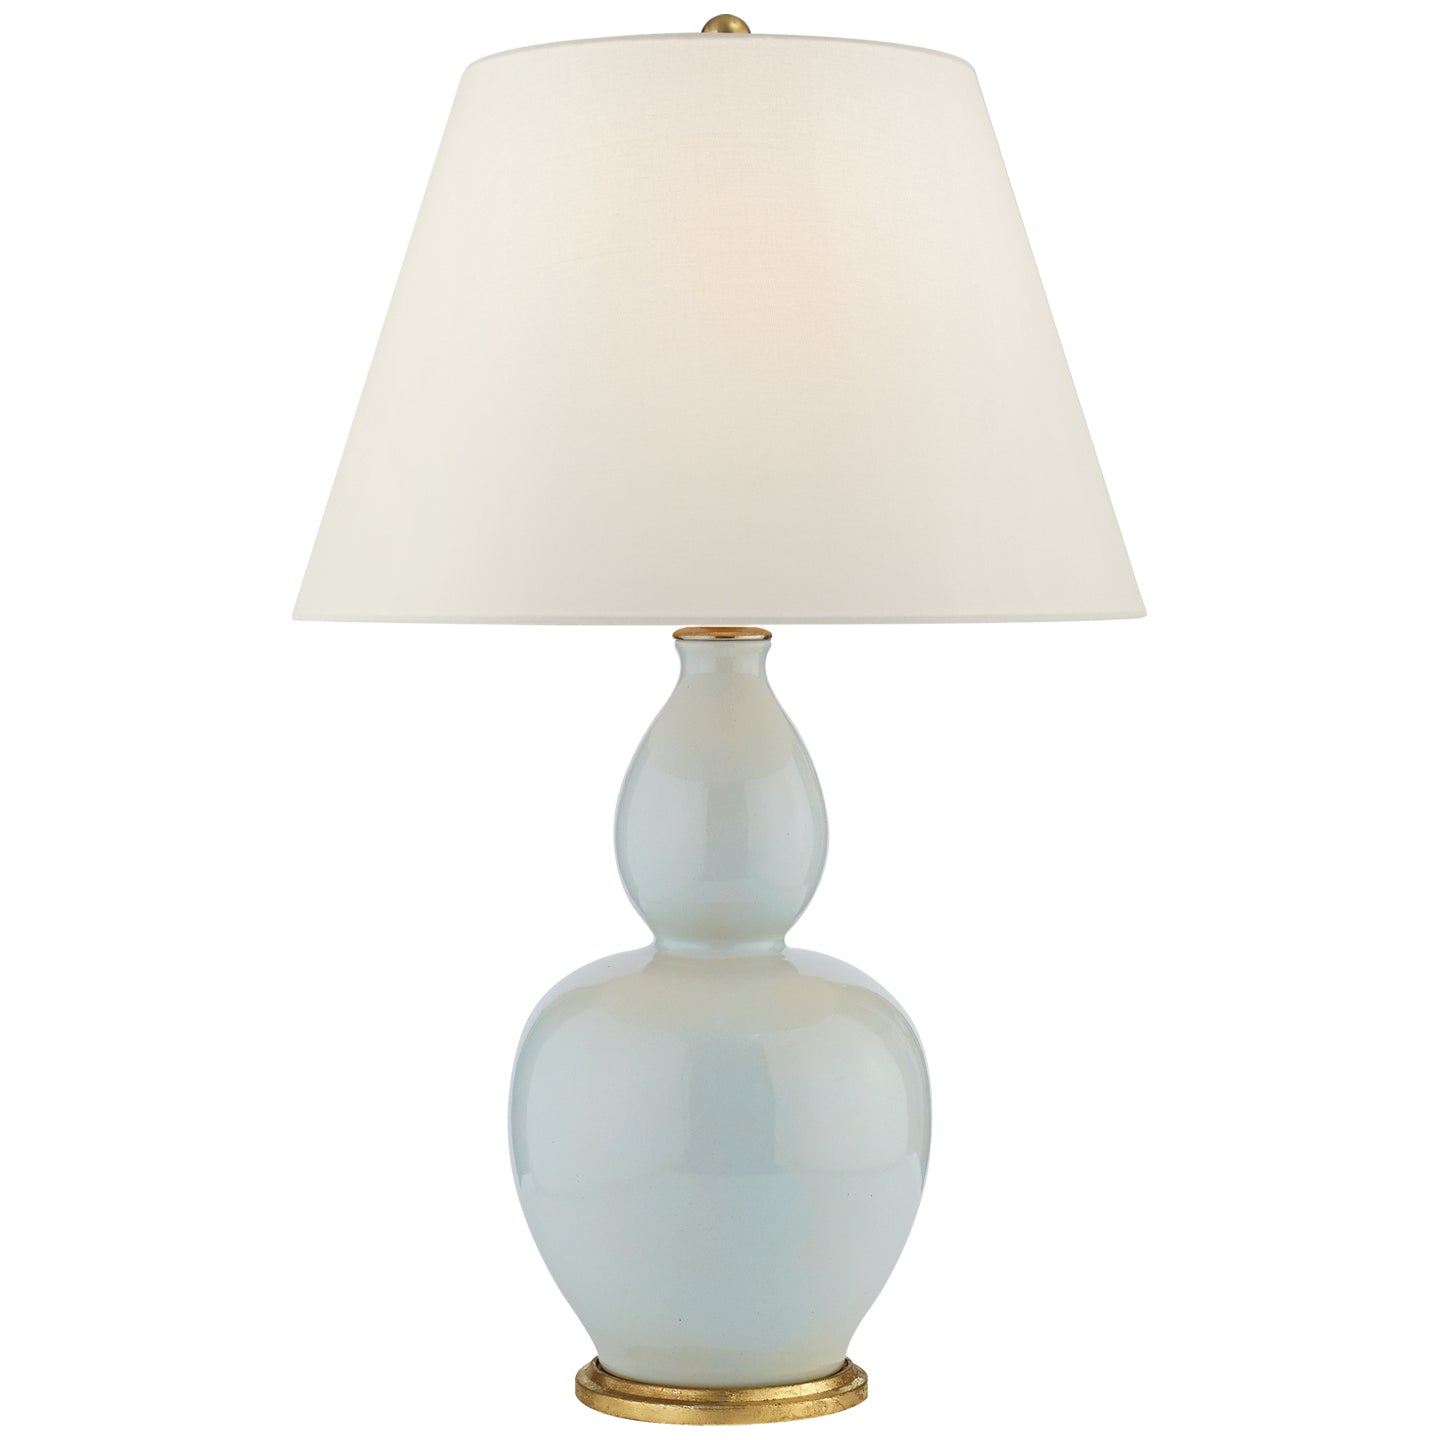 Visual Comfort Signature - CHA 8663ICB-L - One Light Table Lamp - Yue - Ice Blue Porcelain